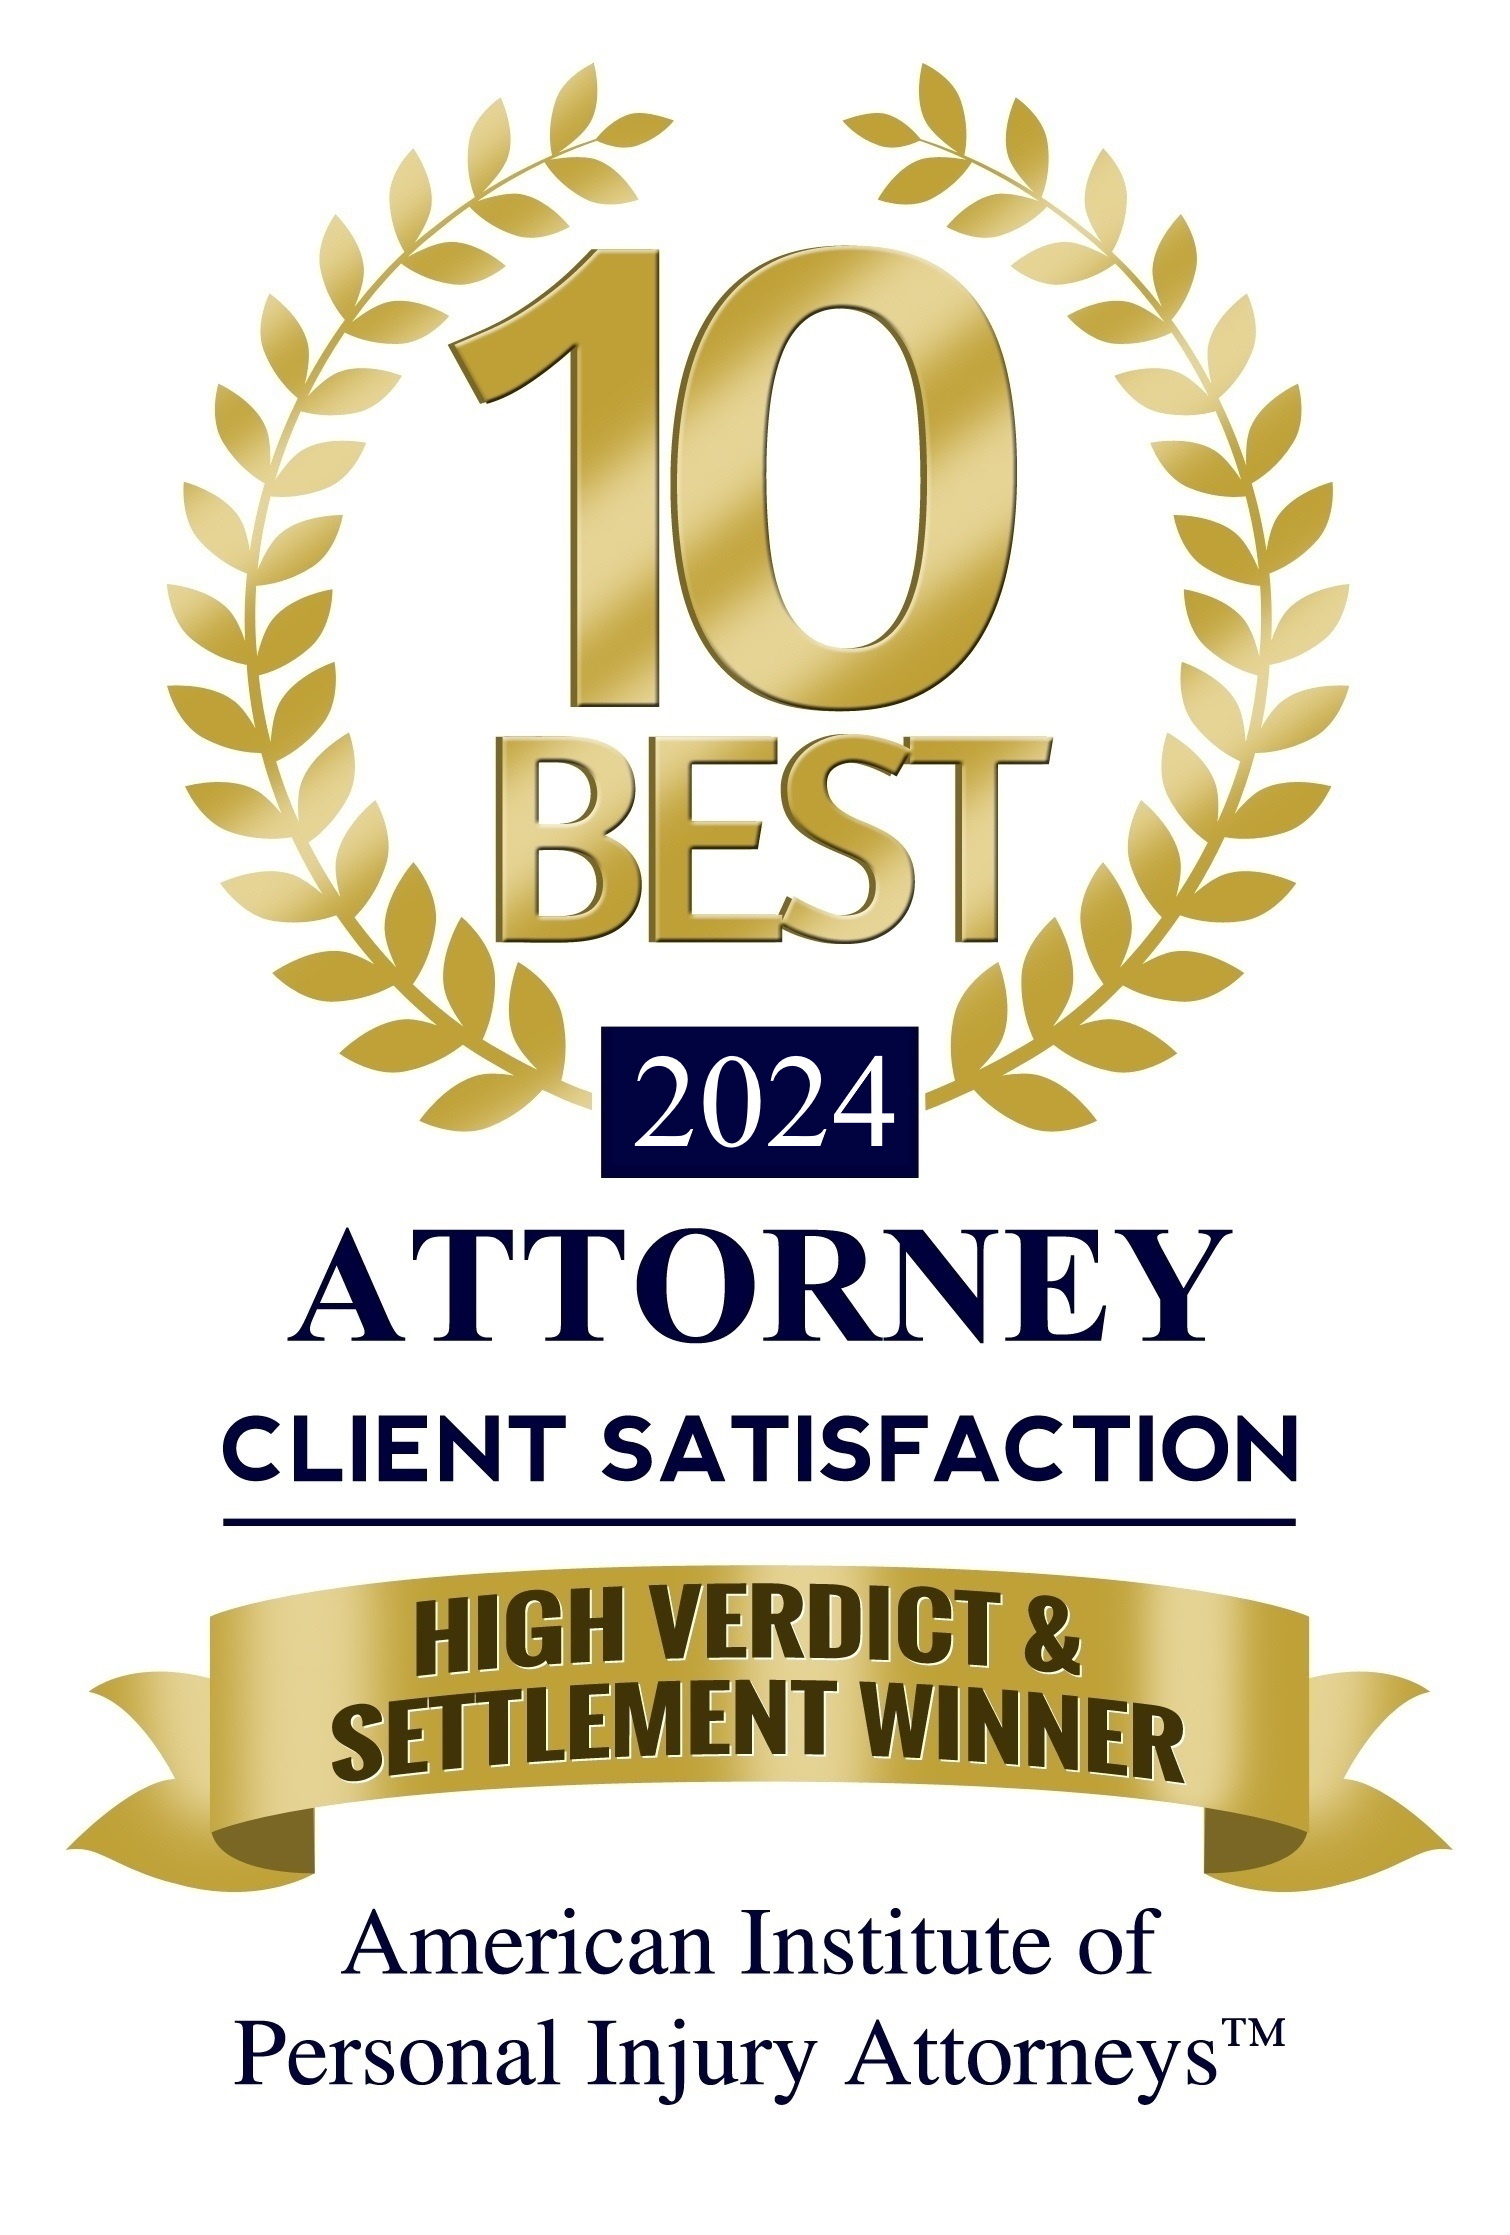 10 Best Attorney High Verdict and Settlement Winner 2024 - American Institute of Personal Injury Attorneys